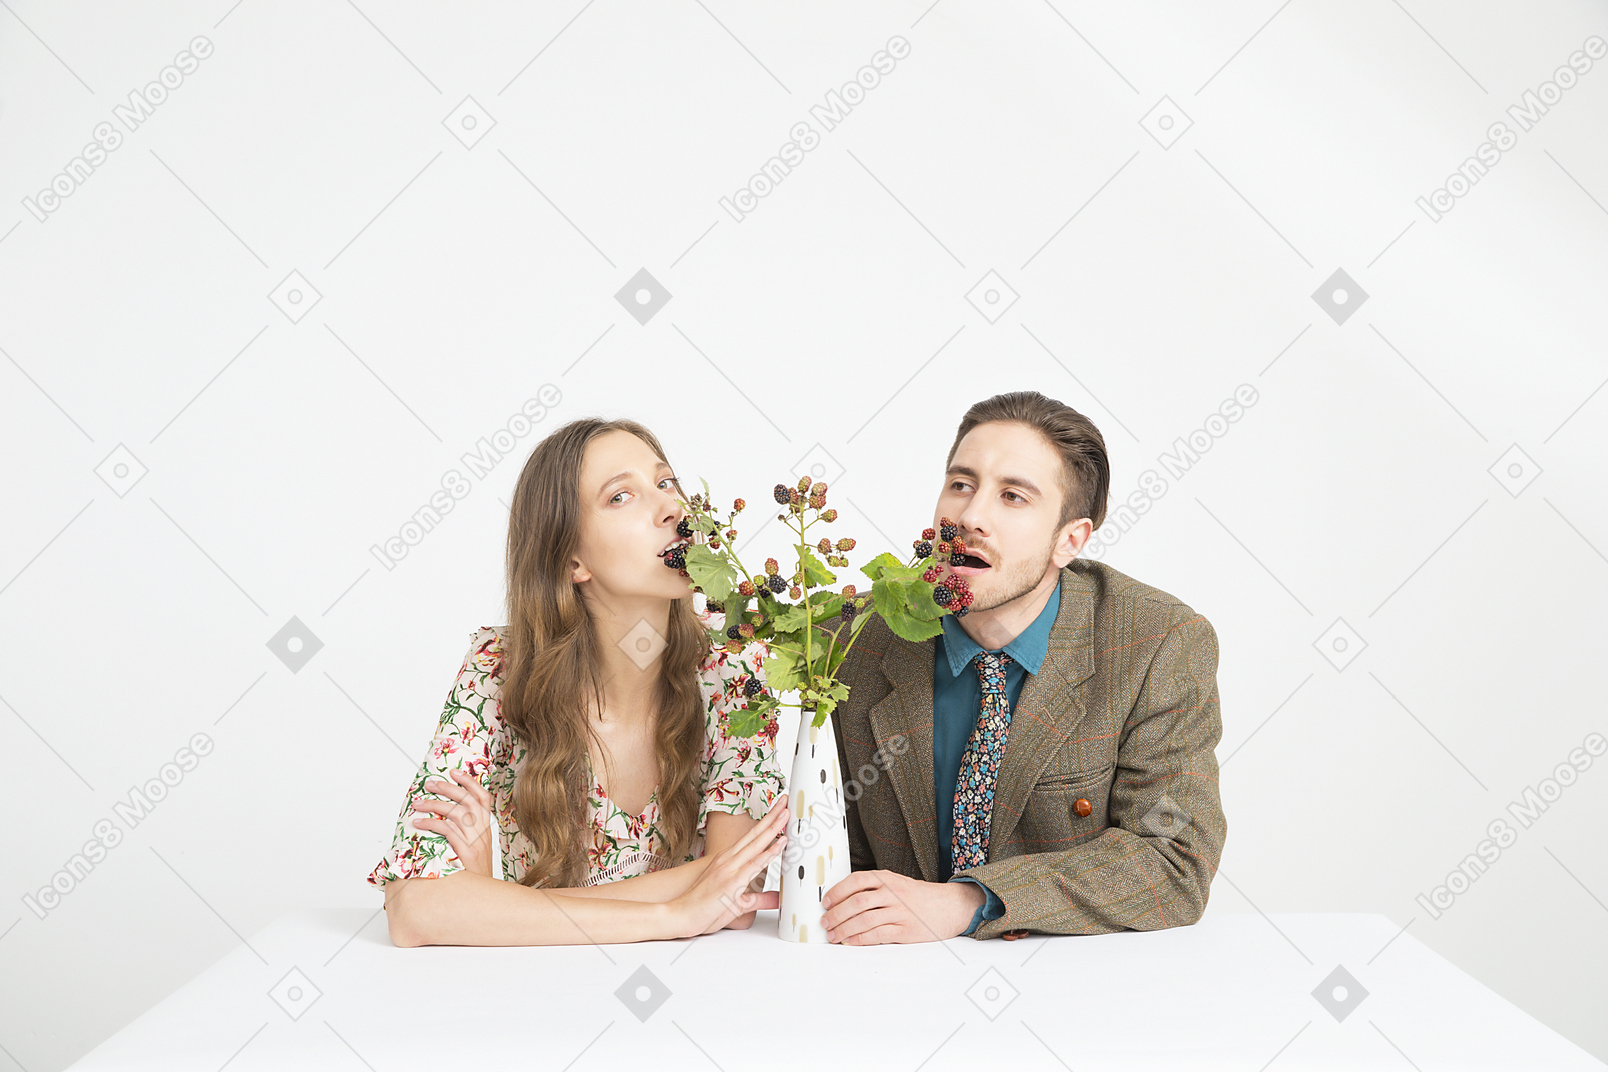 Couple sitting at the table and eating blackberries from the branches in vase